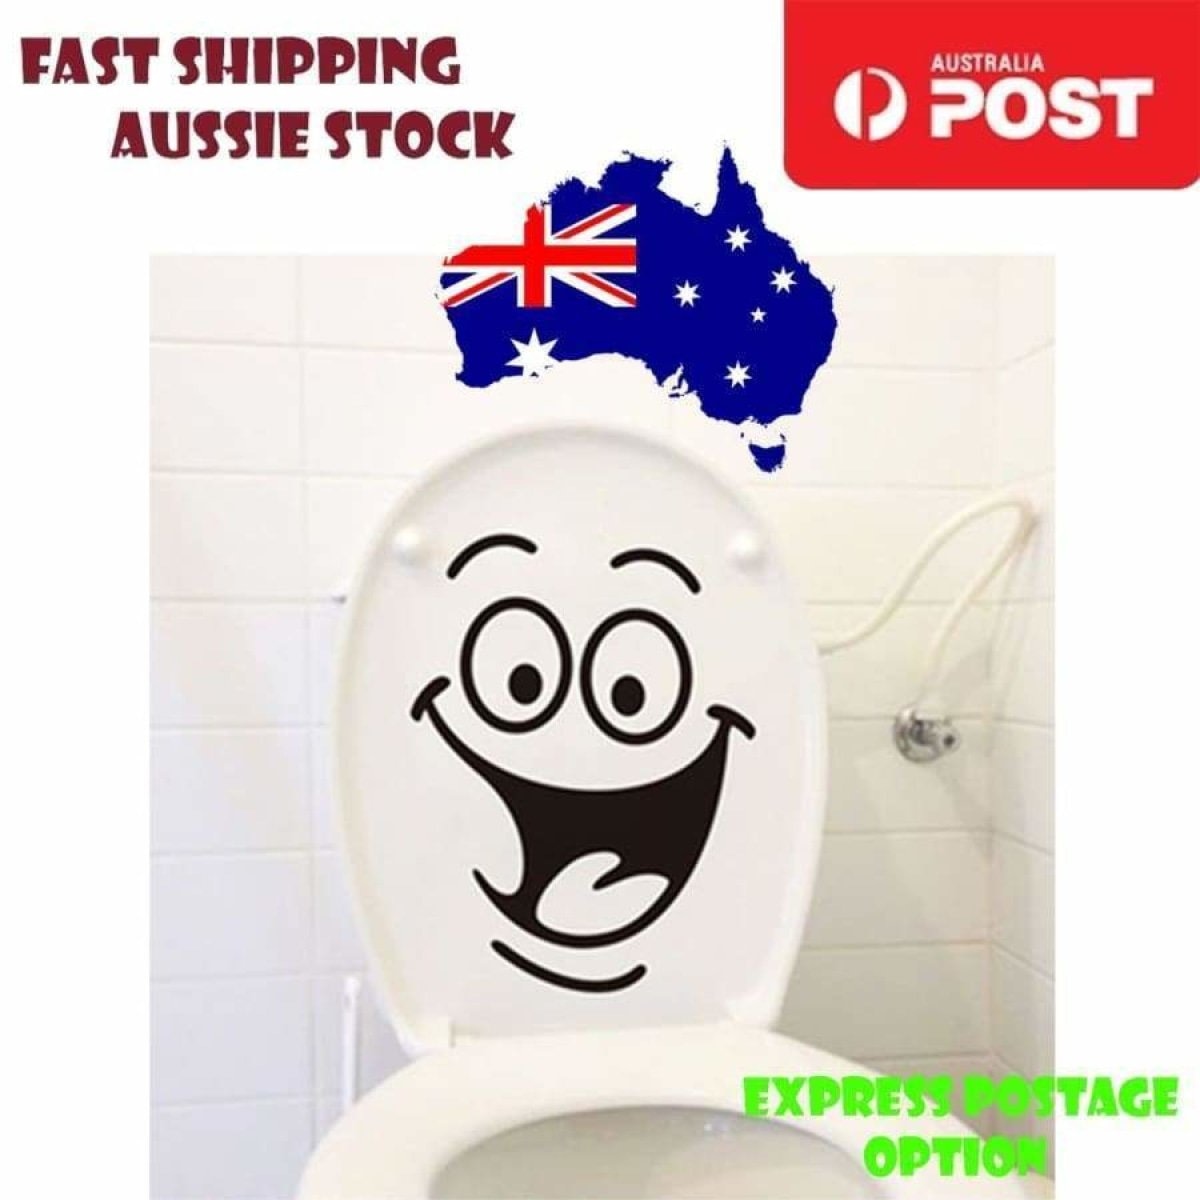 Toilet Seat Lid Sticker Funny Smile Bathroom Decals Removable Wall Art Tiles | Asia Sell